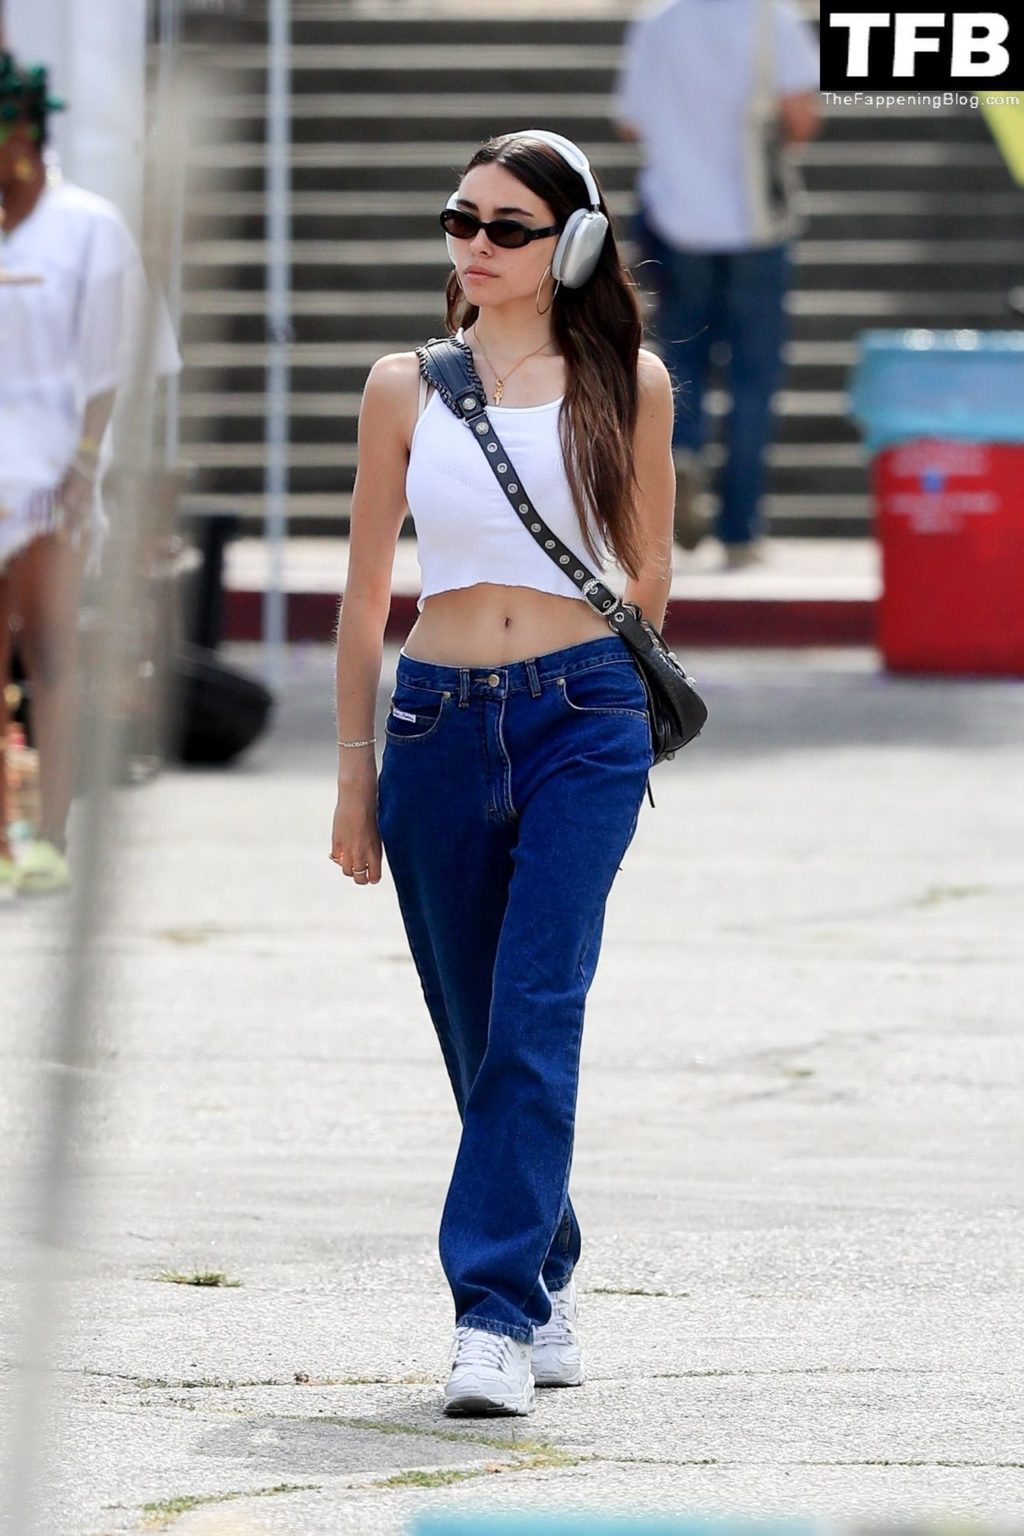 Madison Beer Sexy The Fappening Blog 27 1024x1536 - Madison Beer Wears a Tiny Crop Top Revealing a Toned Waist While Shopping in LA (39 Photos)